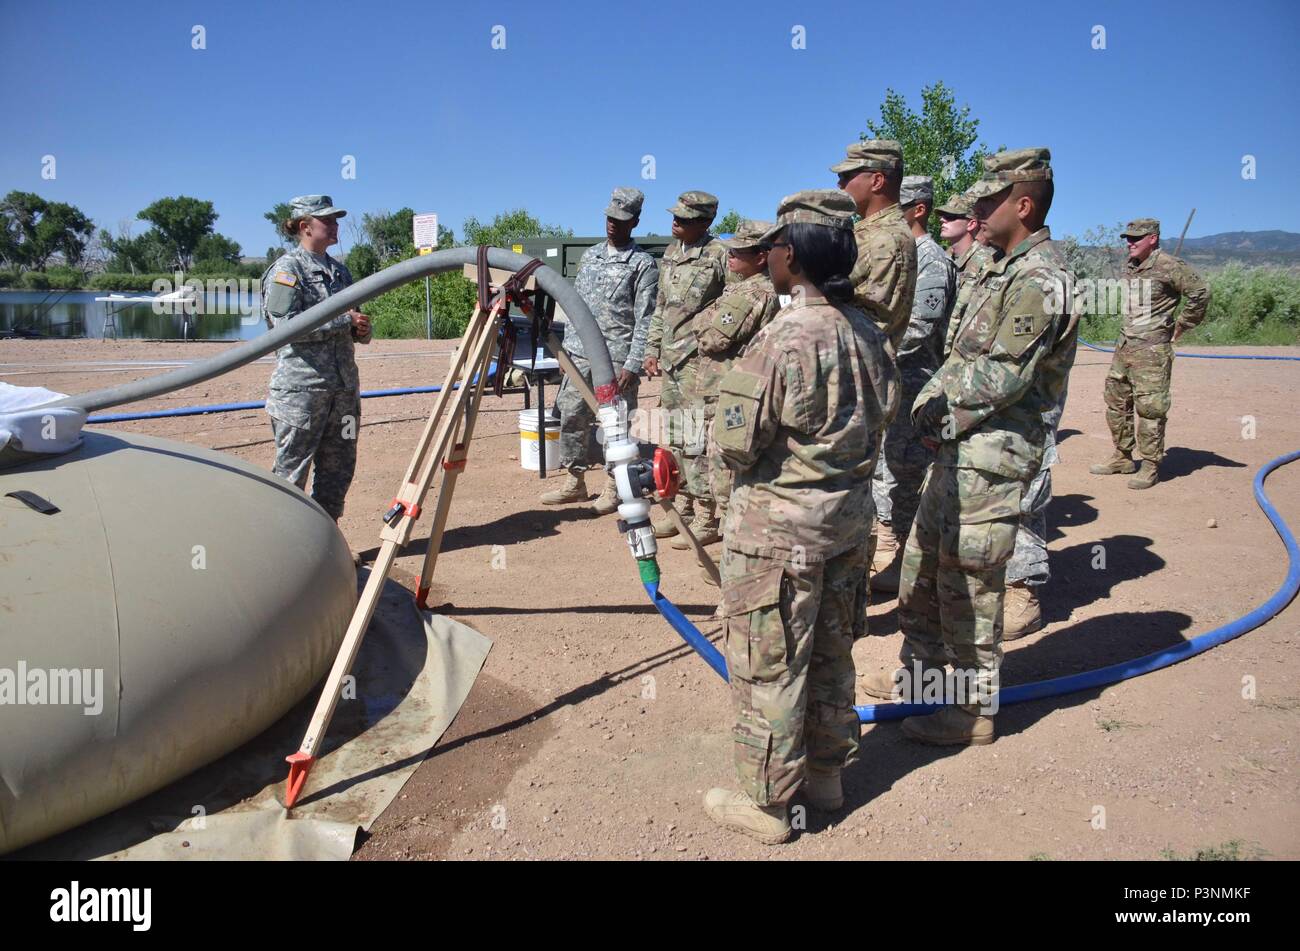 Pfc. Tiffany Hayden, left, 247th Composite Supply Company, 68th Combat Sustainment Support Battalion, 4th Sustainment Brigade, 4th Infantry Division, explains the functions of a tactical water purification system to Soldiers attending the 4th Inf. Div. Water Expo July 7, 2016, at Haymes Reservoir. (Photo by Sgt. Benjamin Kullman) Stock Photo